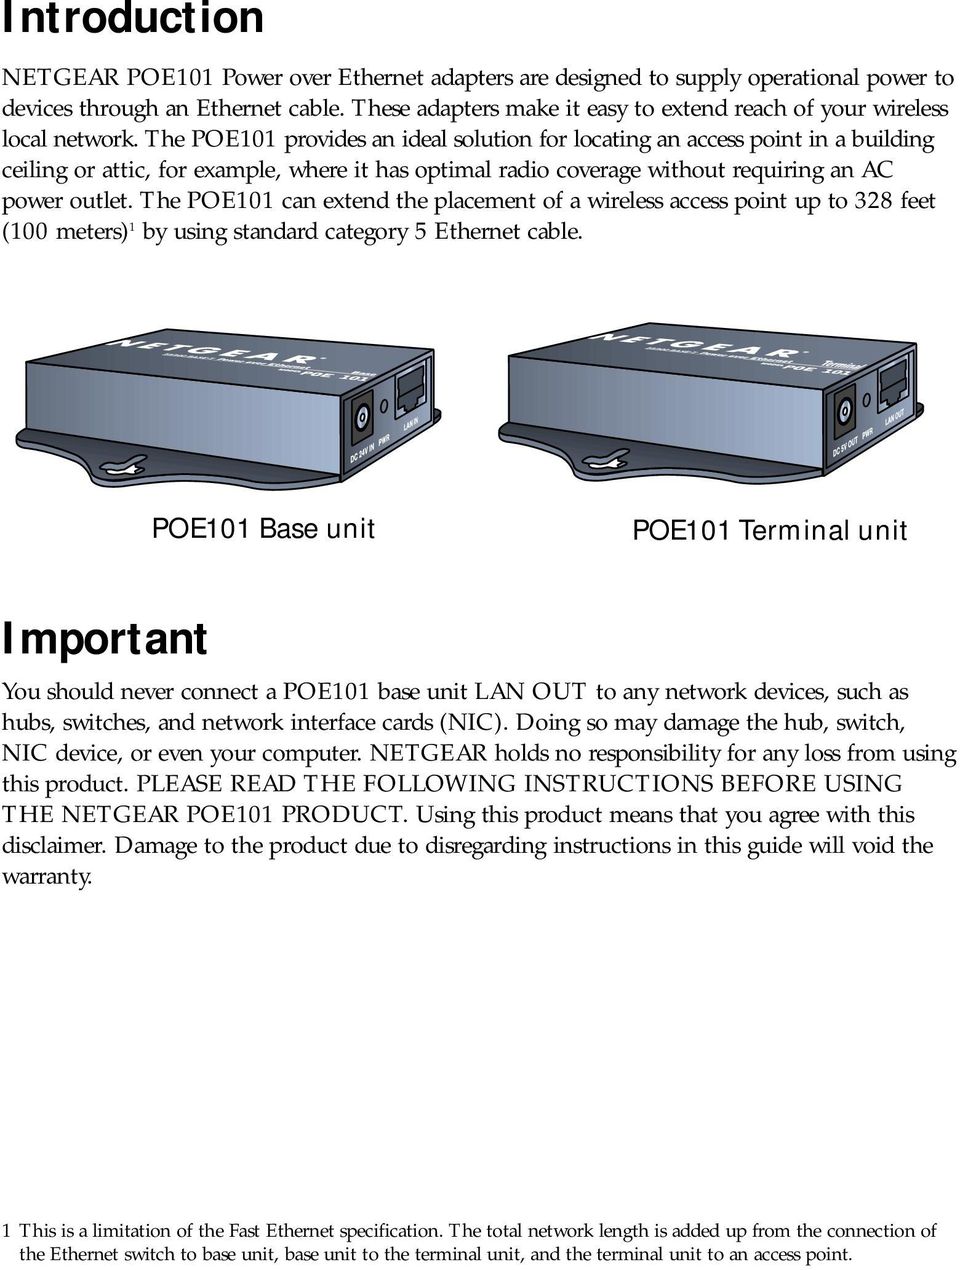 The POE101 provides an ideal solution for locating an access point in a building ceiling or attic, for example, where it has optimal radio coverage without requiring an AC power outlet.